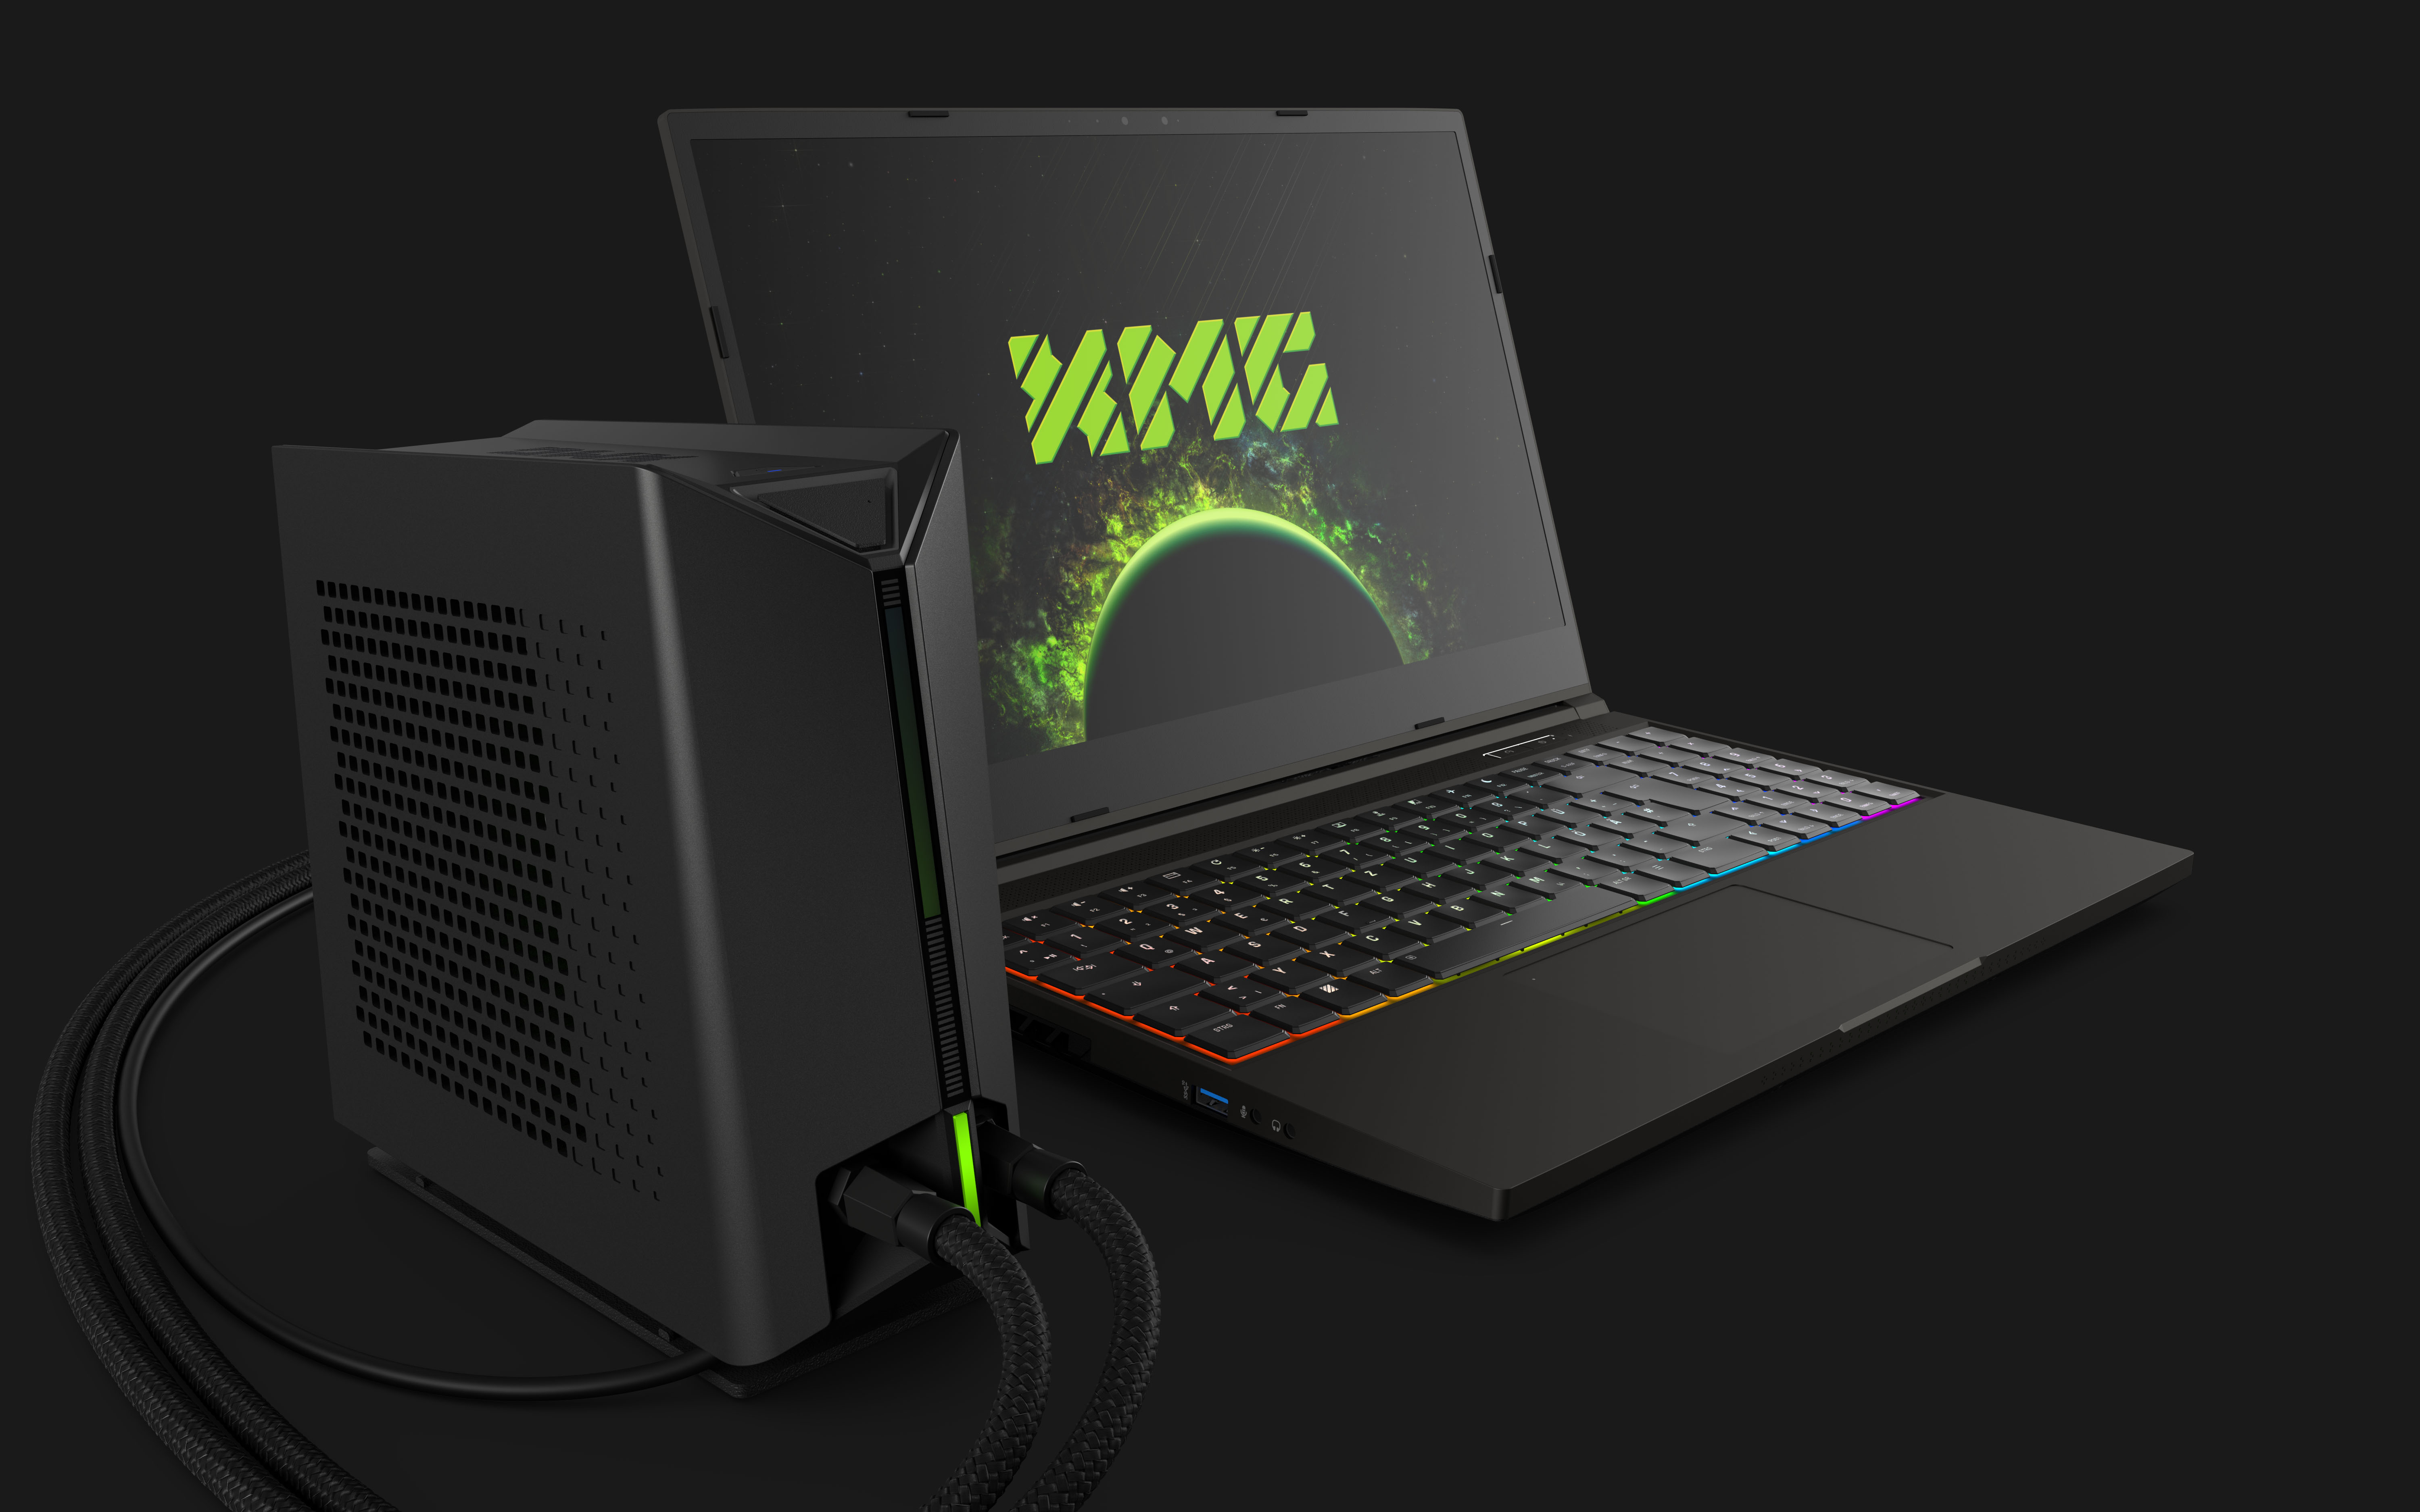 XMG's New Laptop Works With an External Liquid Cooler